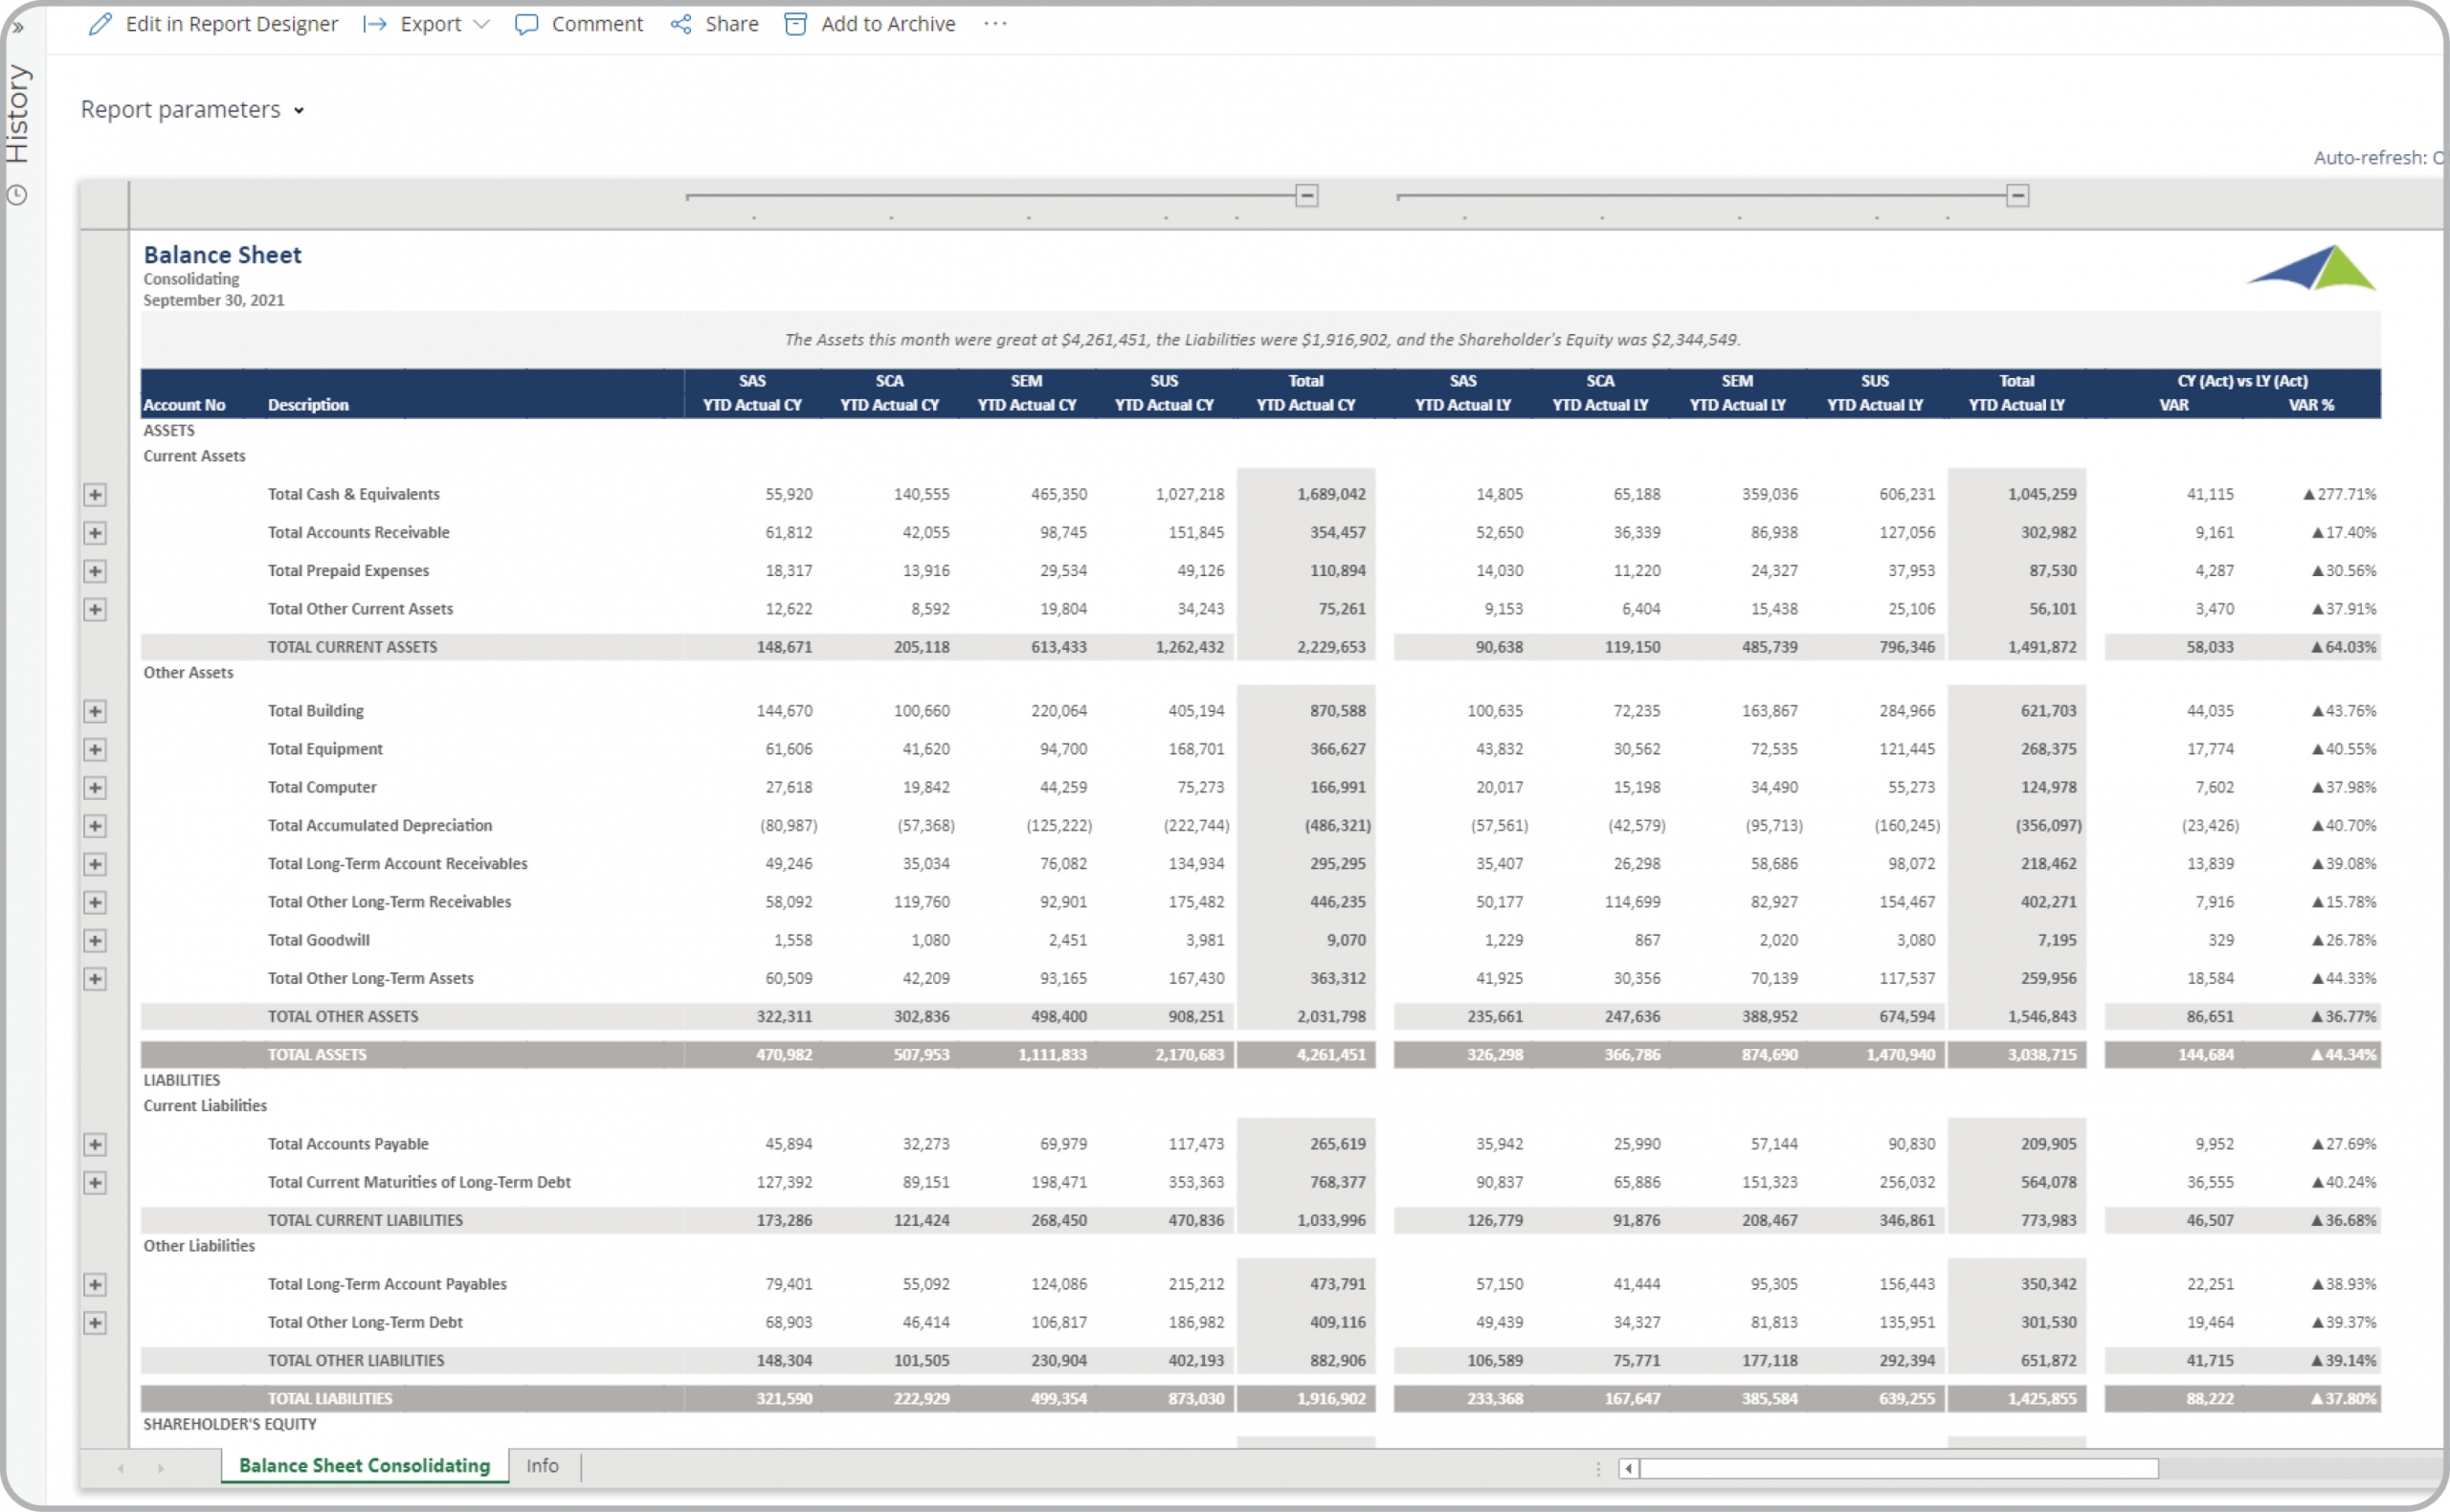 Example of a Consolidating Balance Sheet Report to Streamline the Monthly Reporting Process